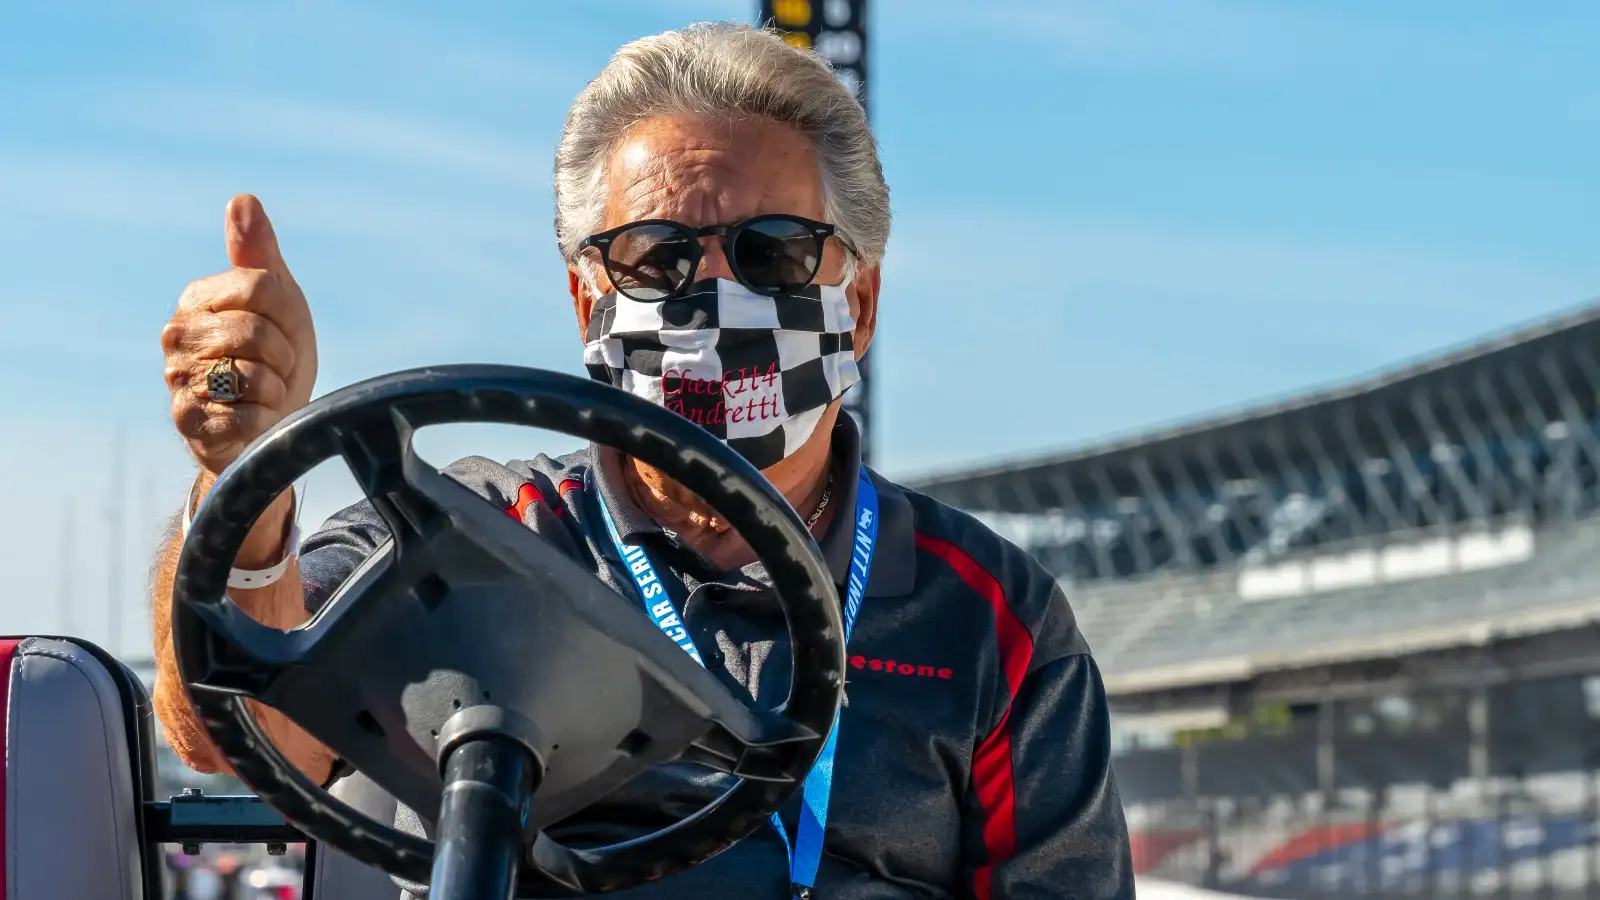 Mario Andretti drives a golf cart. United States, August 2020.